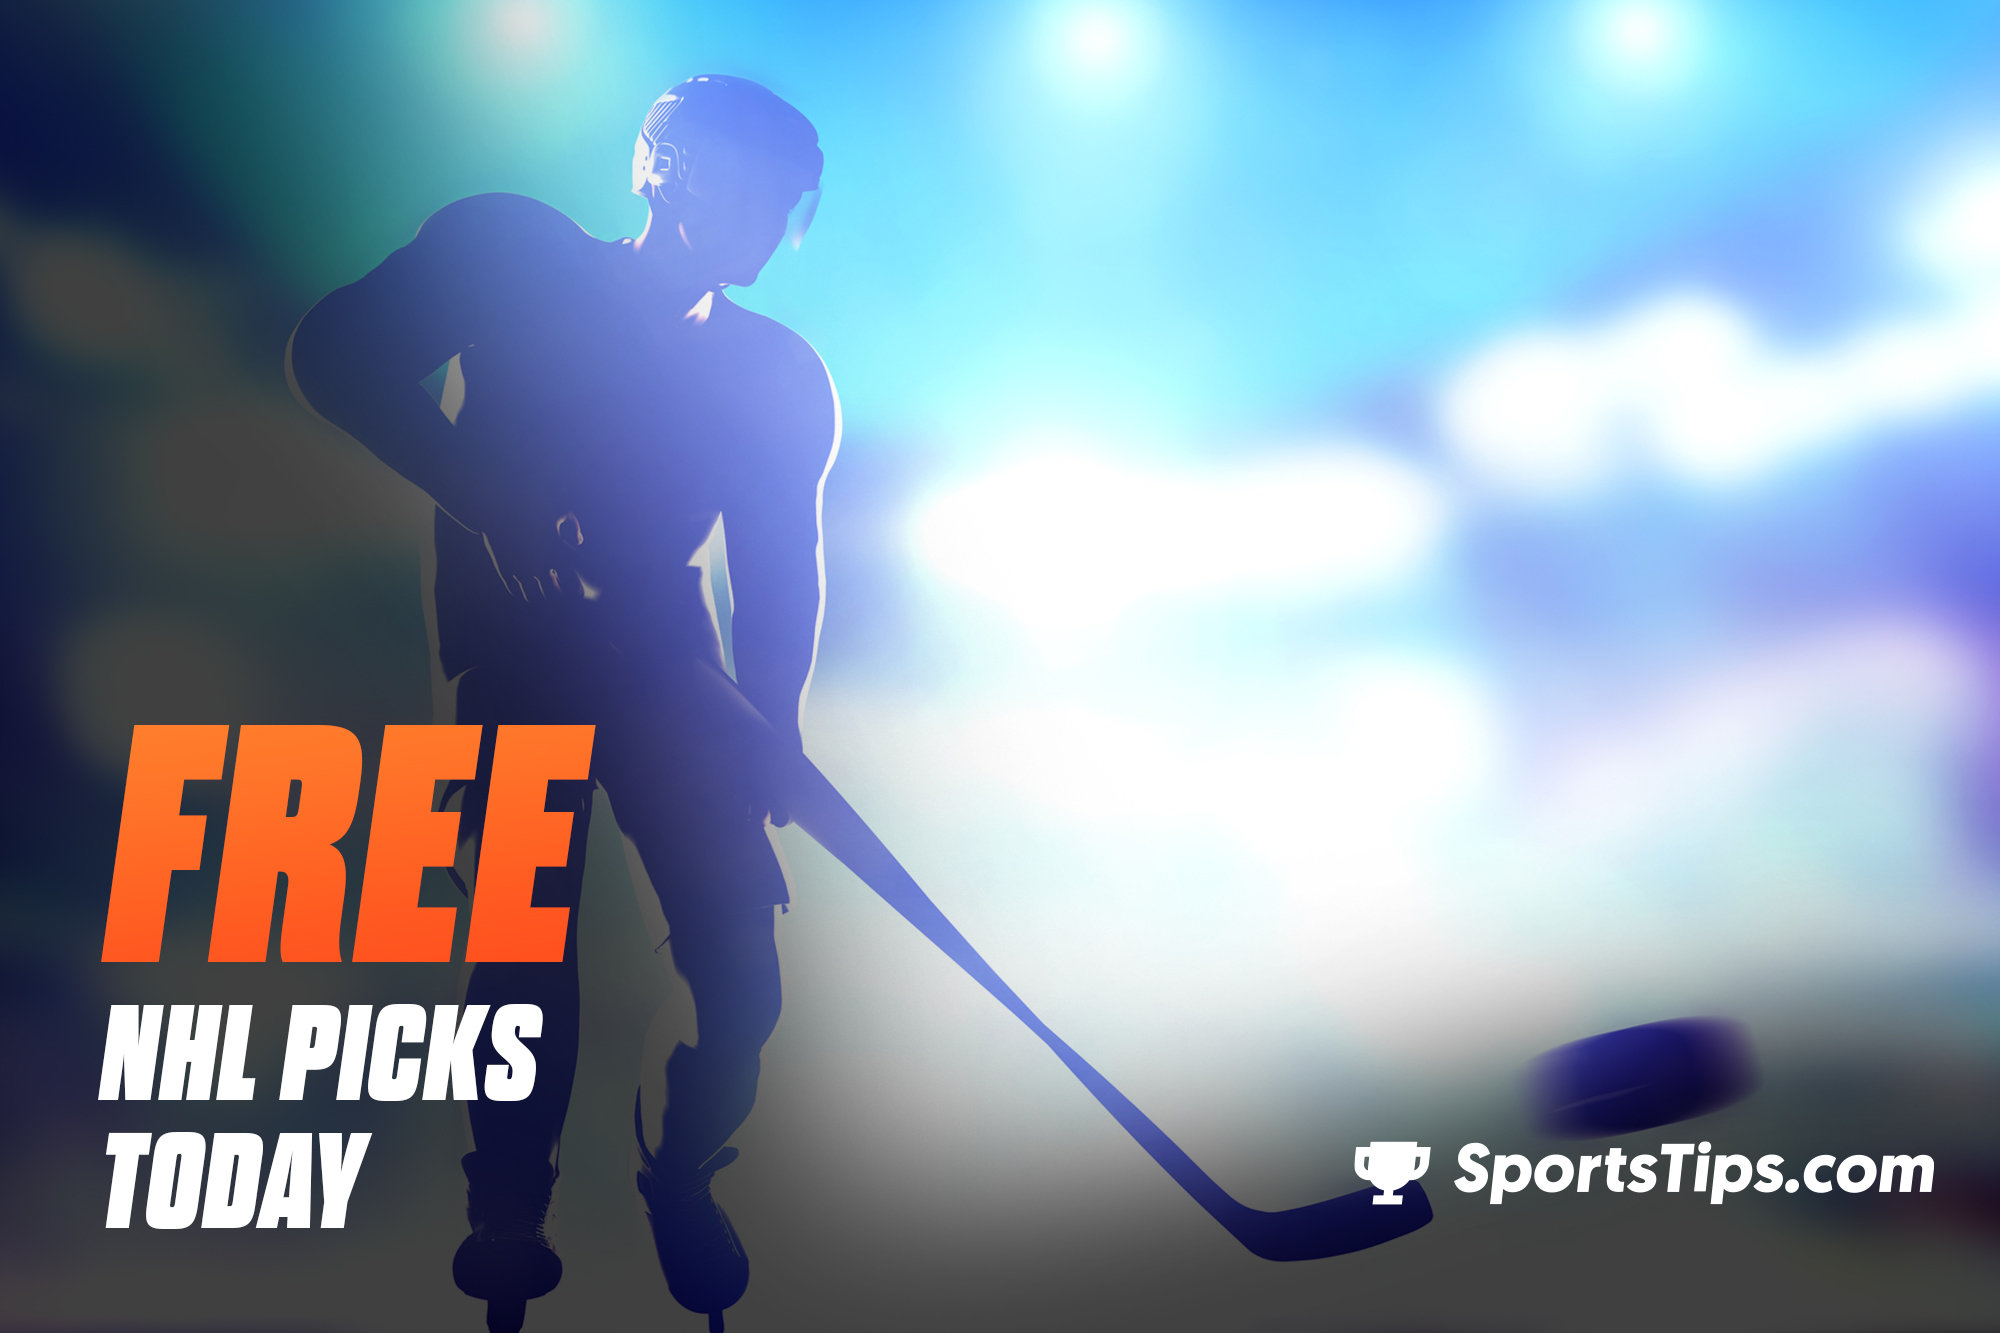 Free NHL Picks Today for Sunday, February 27th, 2022